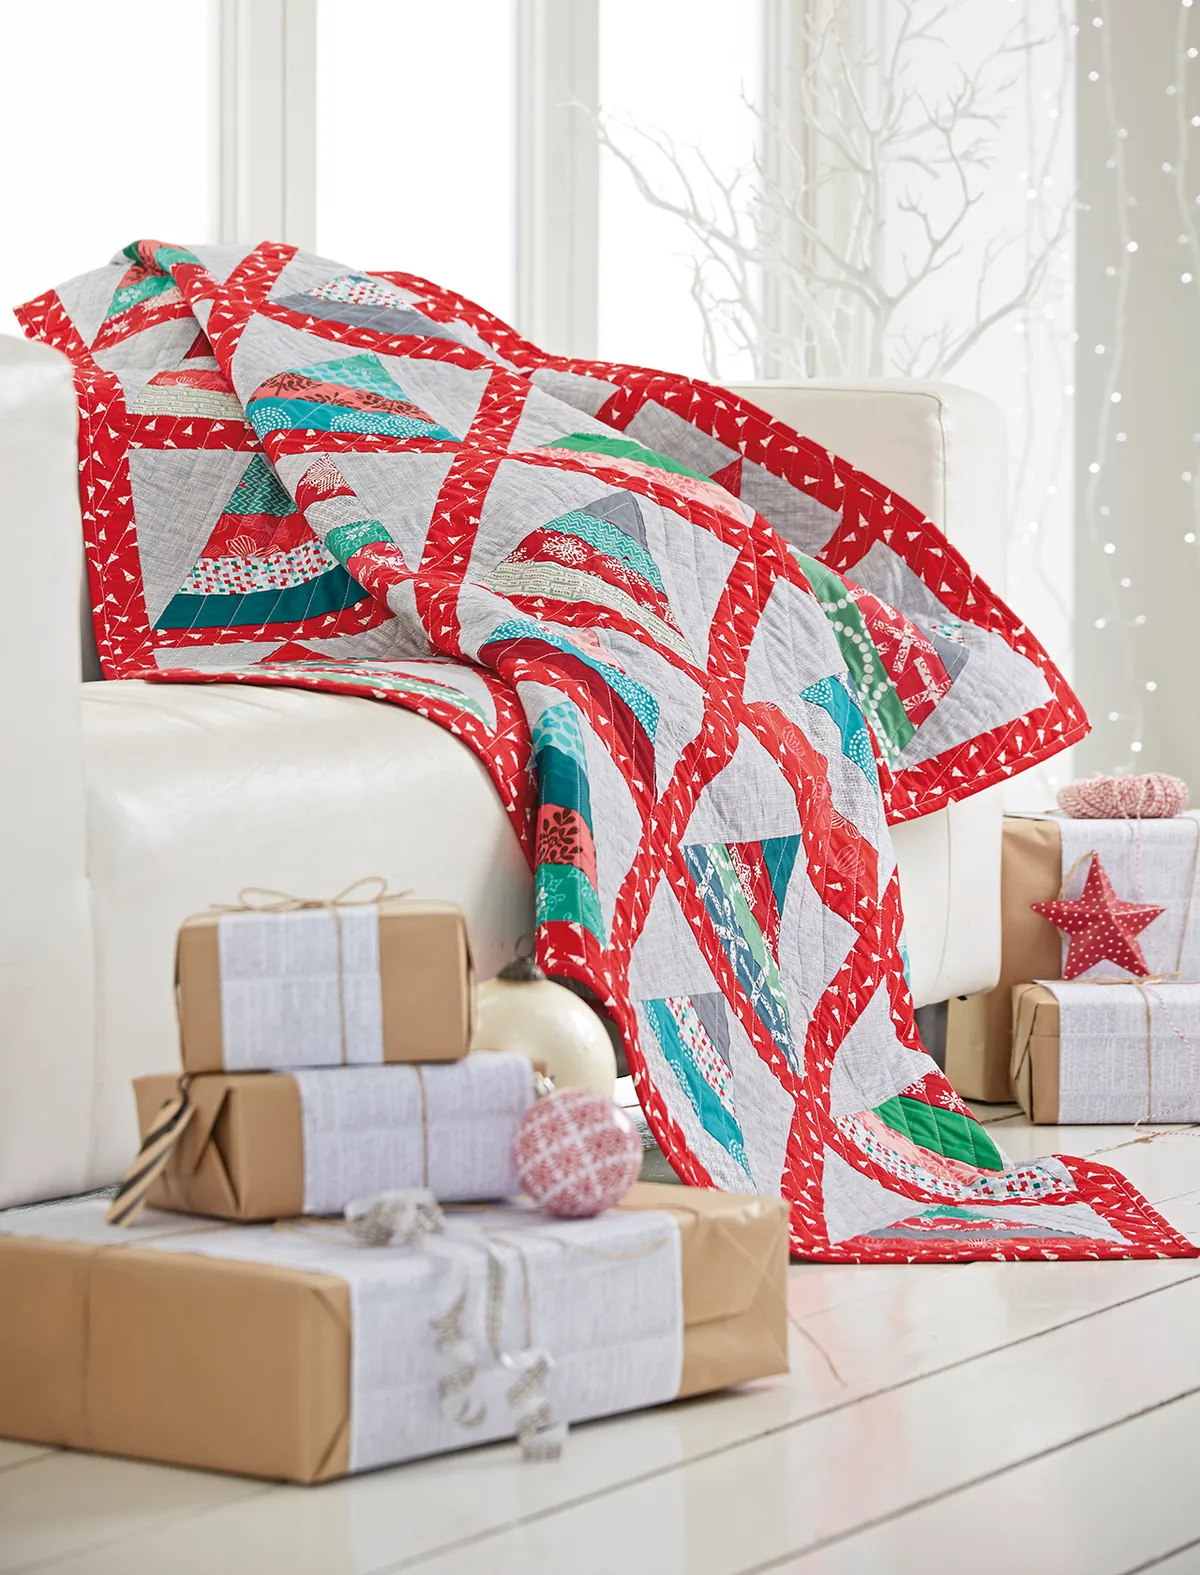 Free Christmas quilt pattern